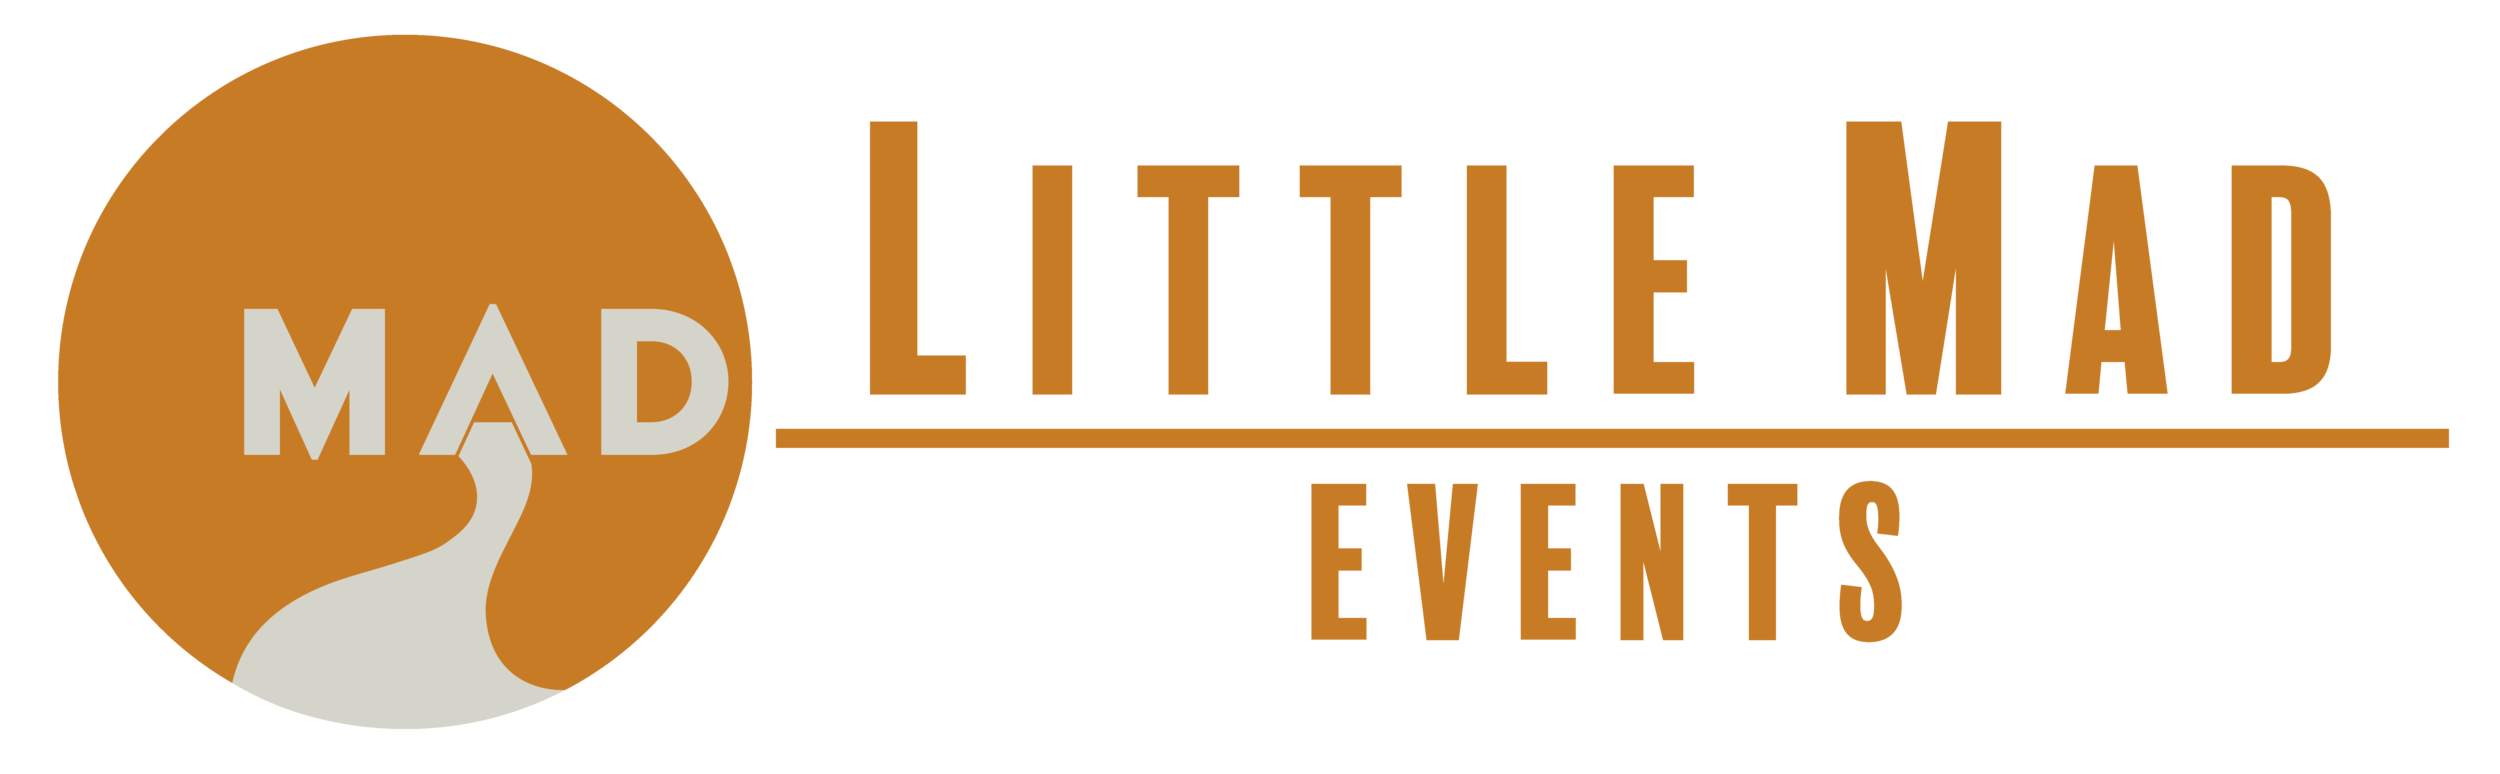 little Mad events